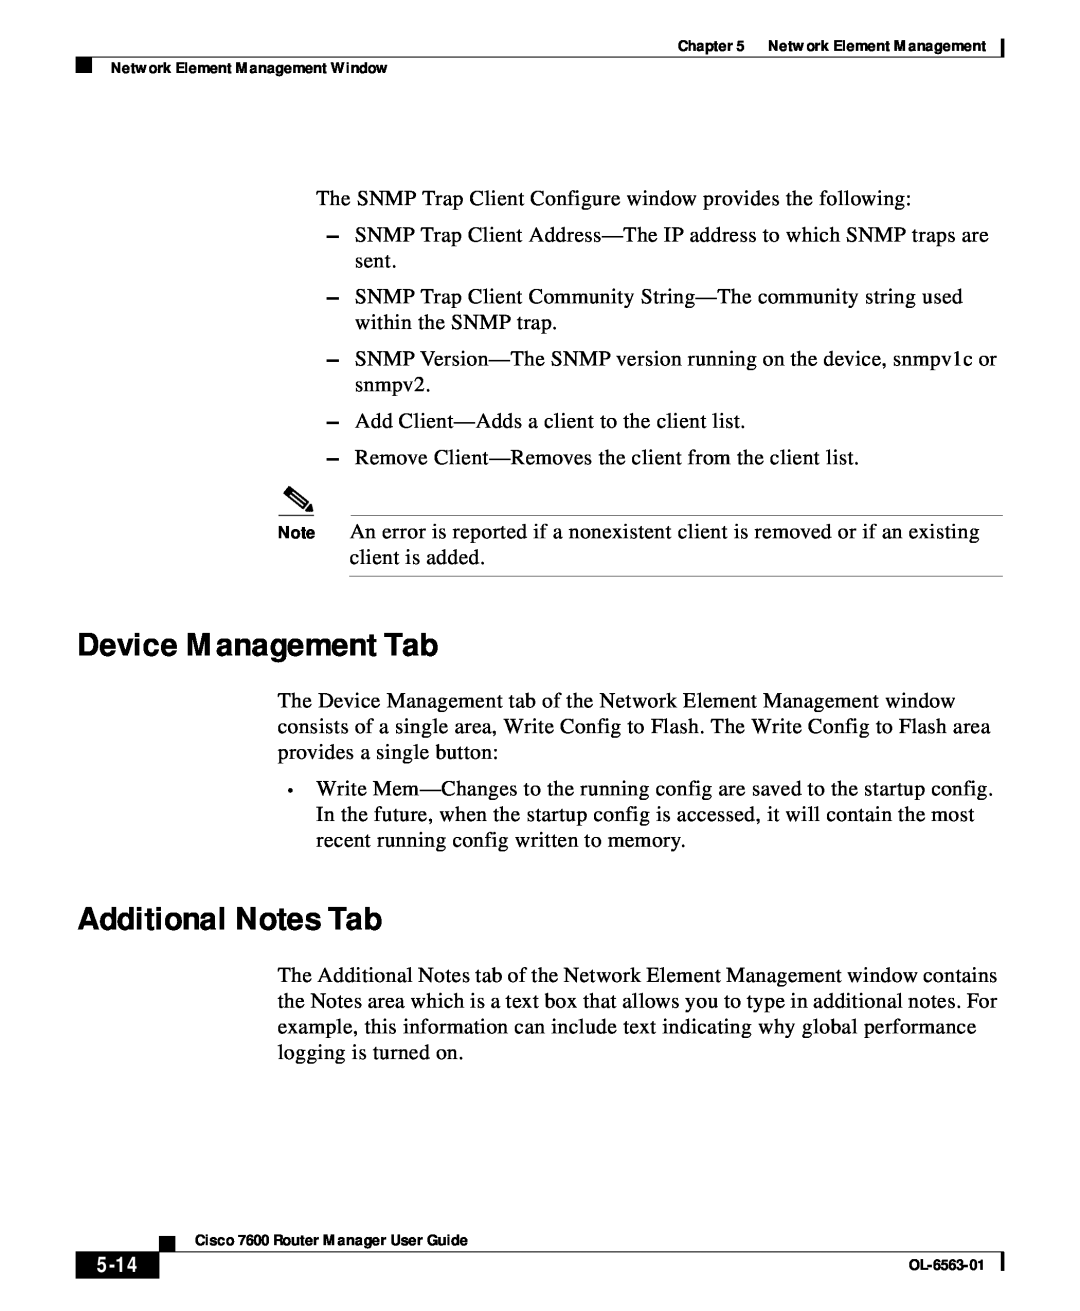 Cisco Systems OL-6563-01 manual Device Management Tab, Additional Notes Tab, 5-14 